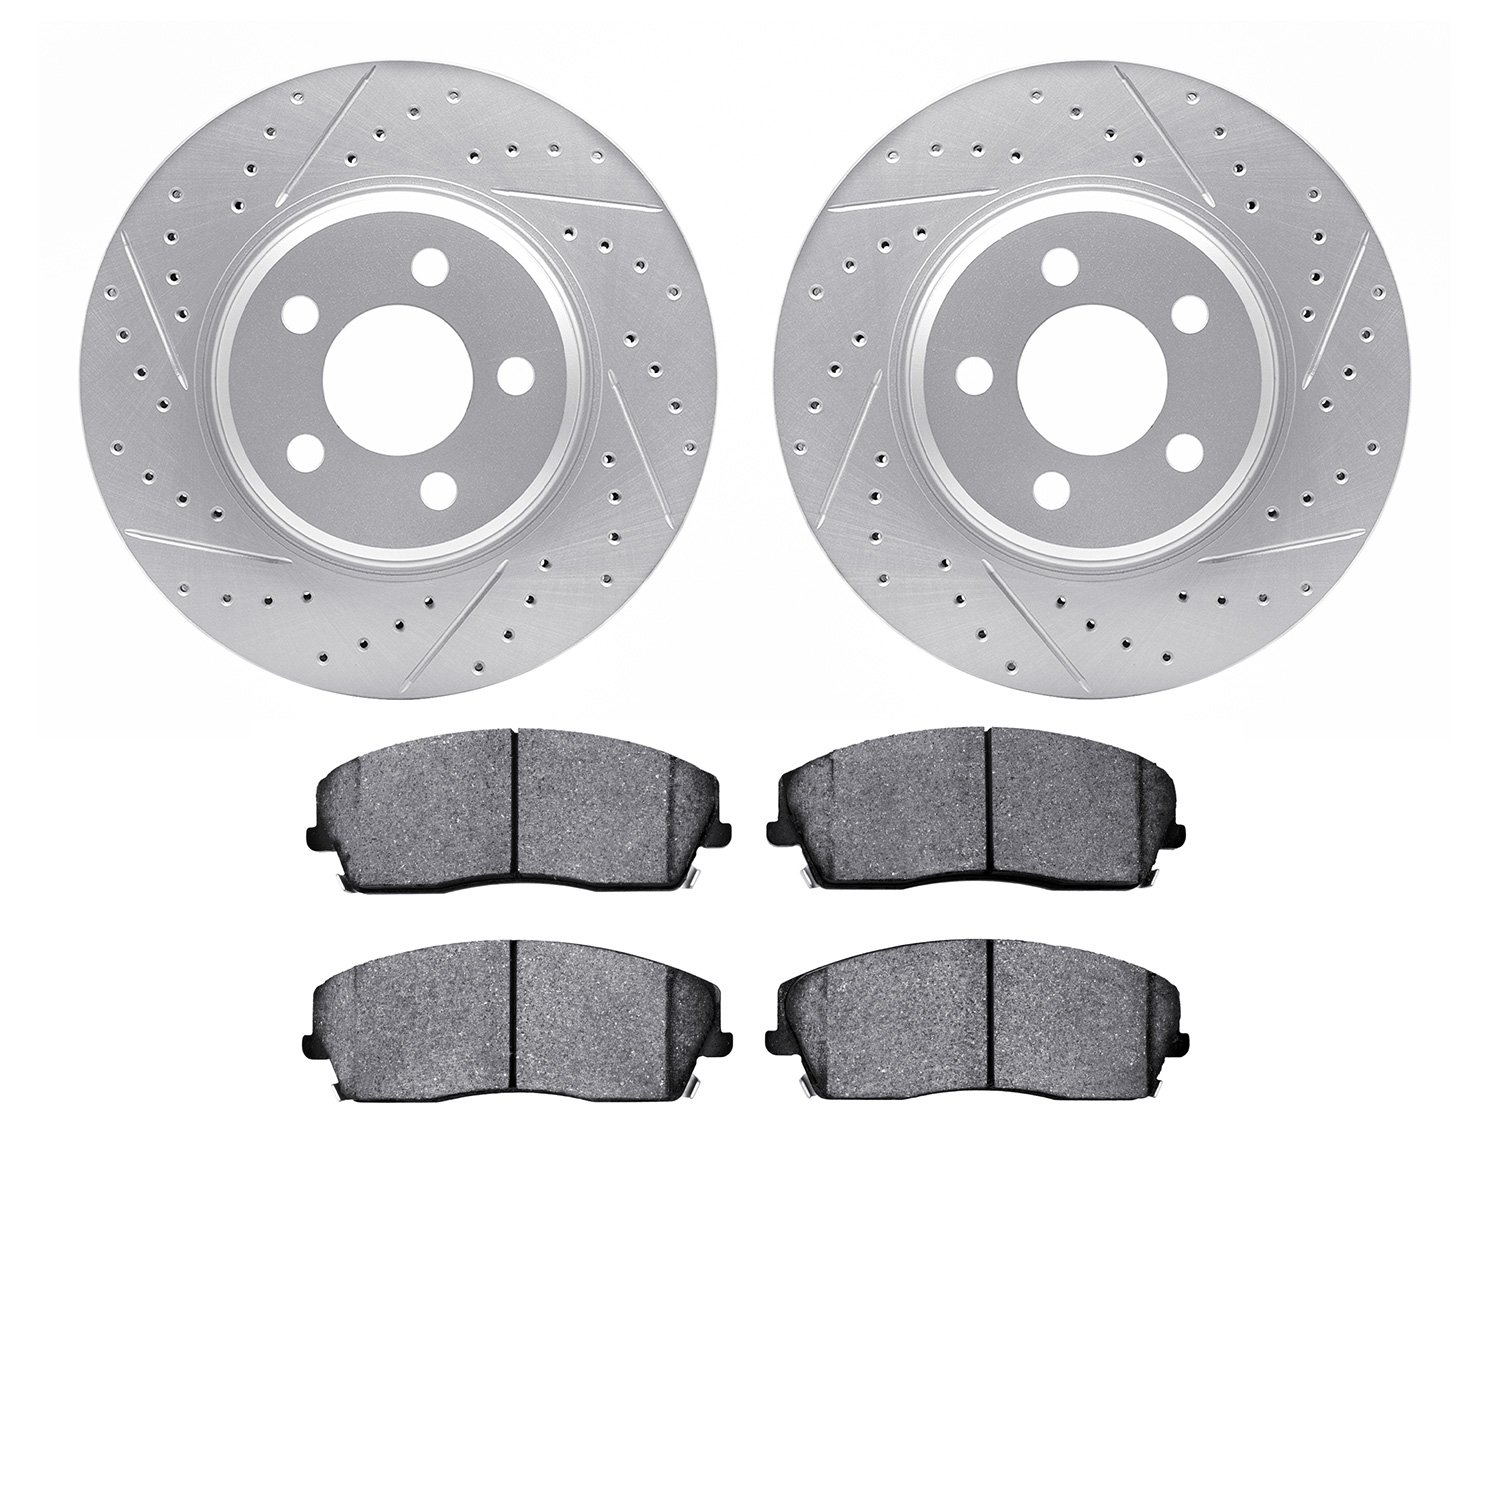 2502-39008 Geoperformance Drilled/Slotted Rotors w/5000 Advanced Brake Pads Kit, Fits Select Mopar, Position: Front